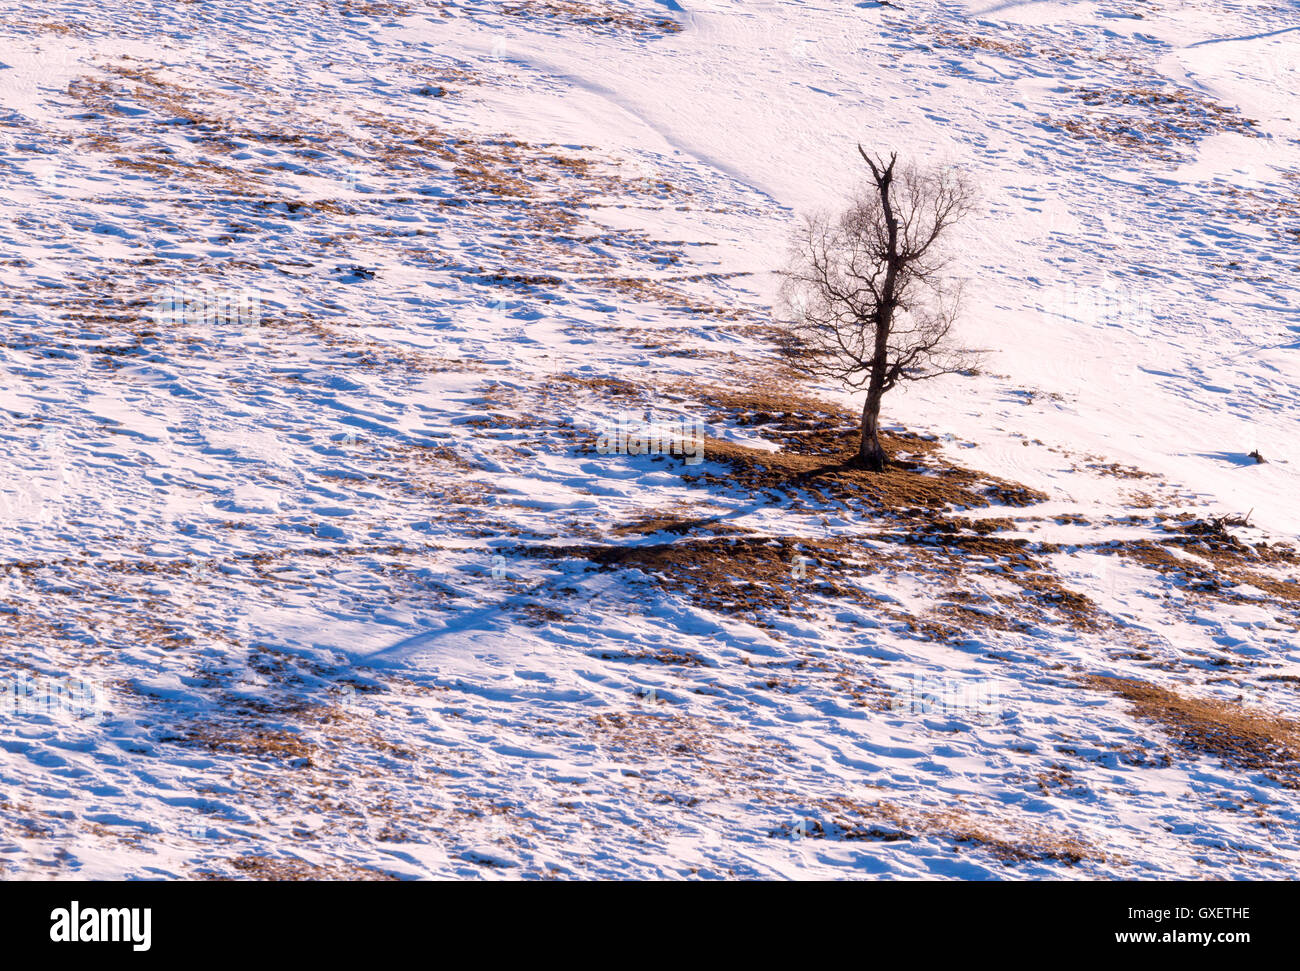 Seasonal nature winter image: mountain landscape with tree (dark silhouette) at a snowy mountain descent (slope) field Stock Photo